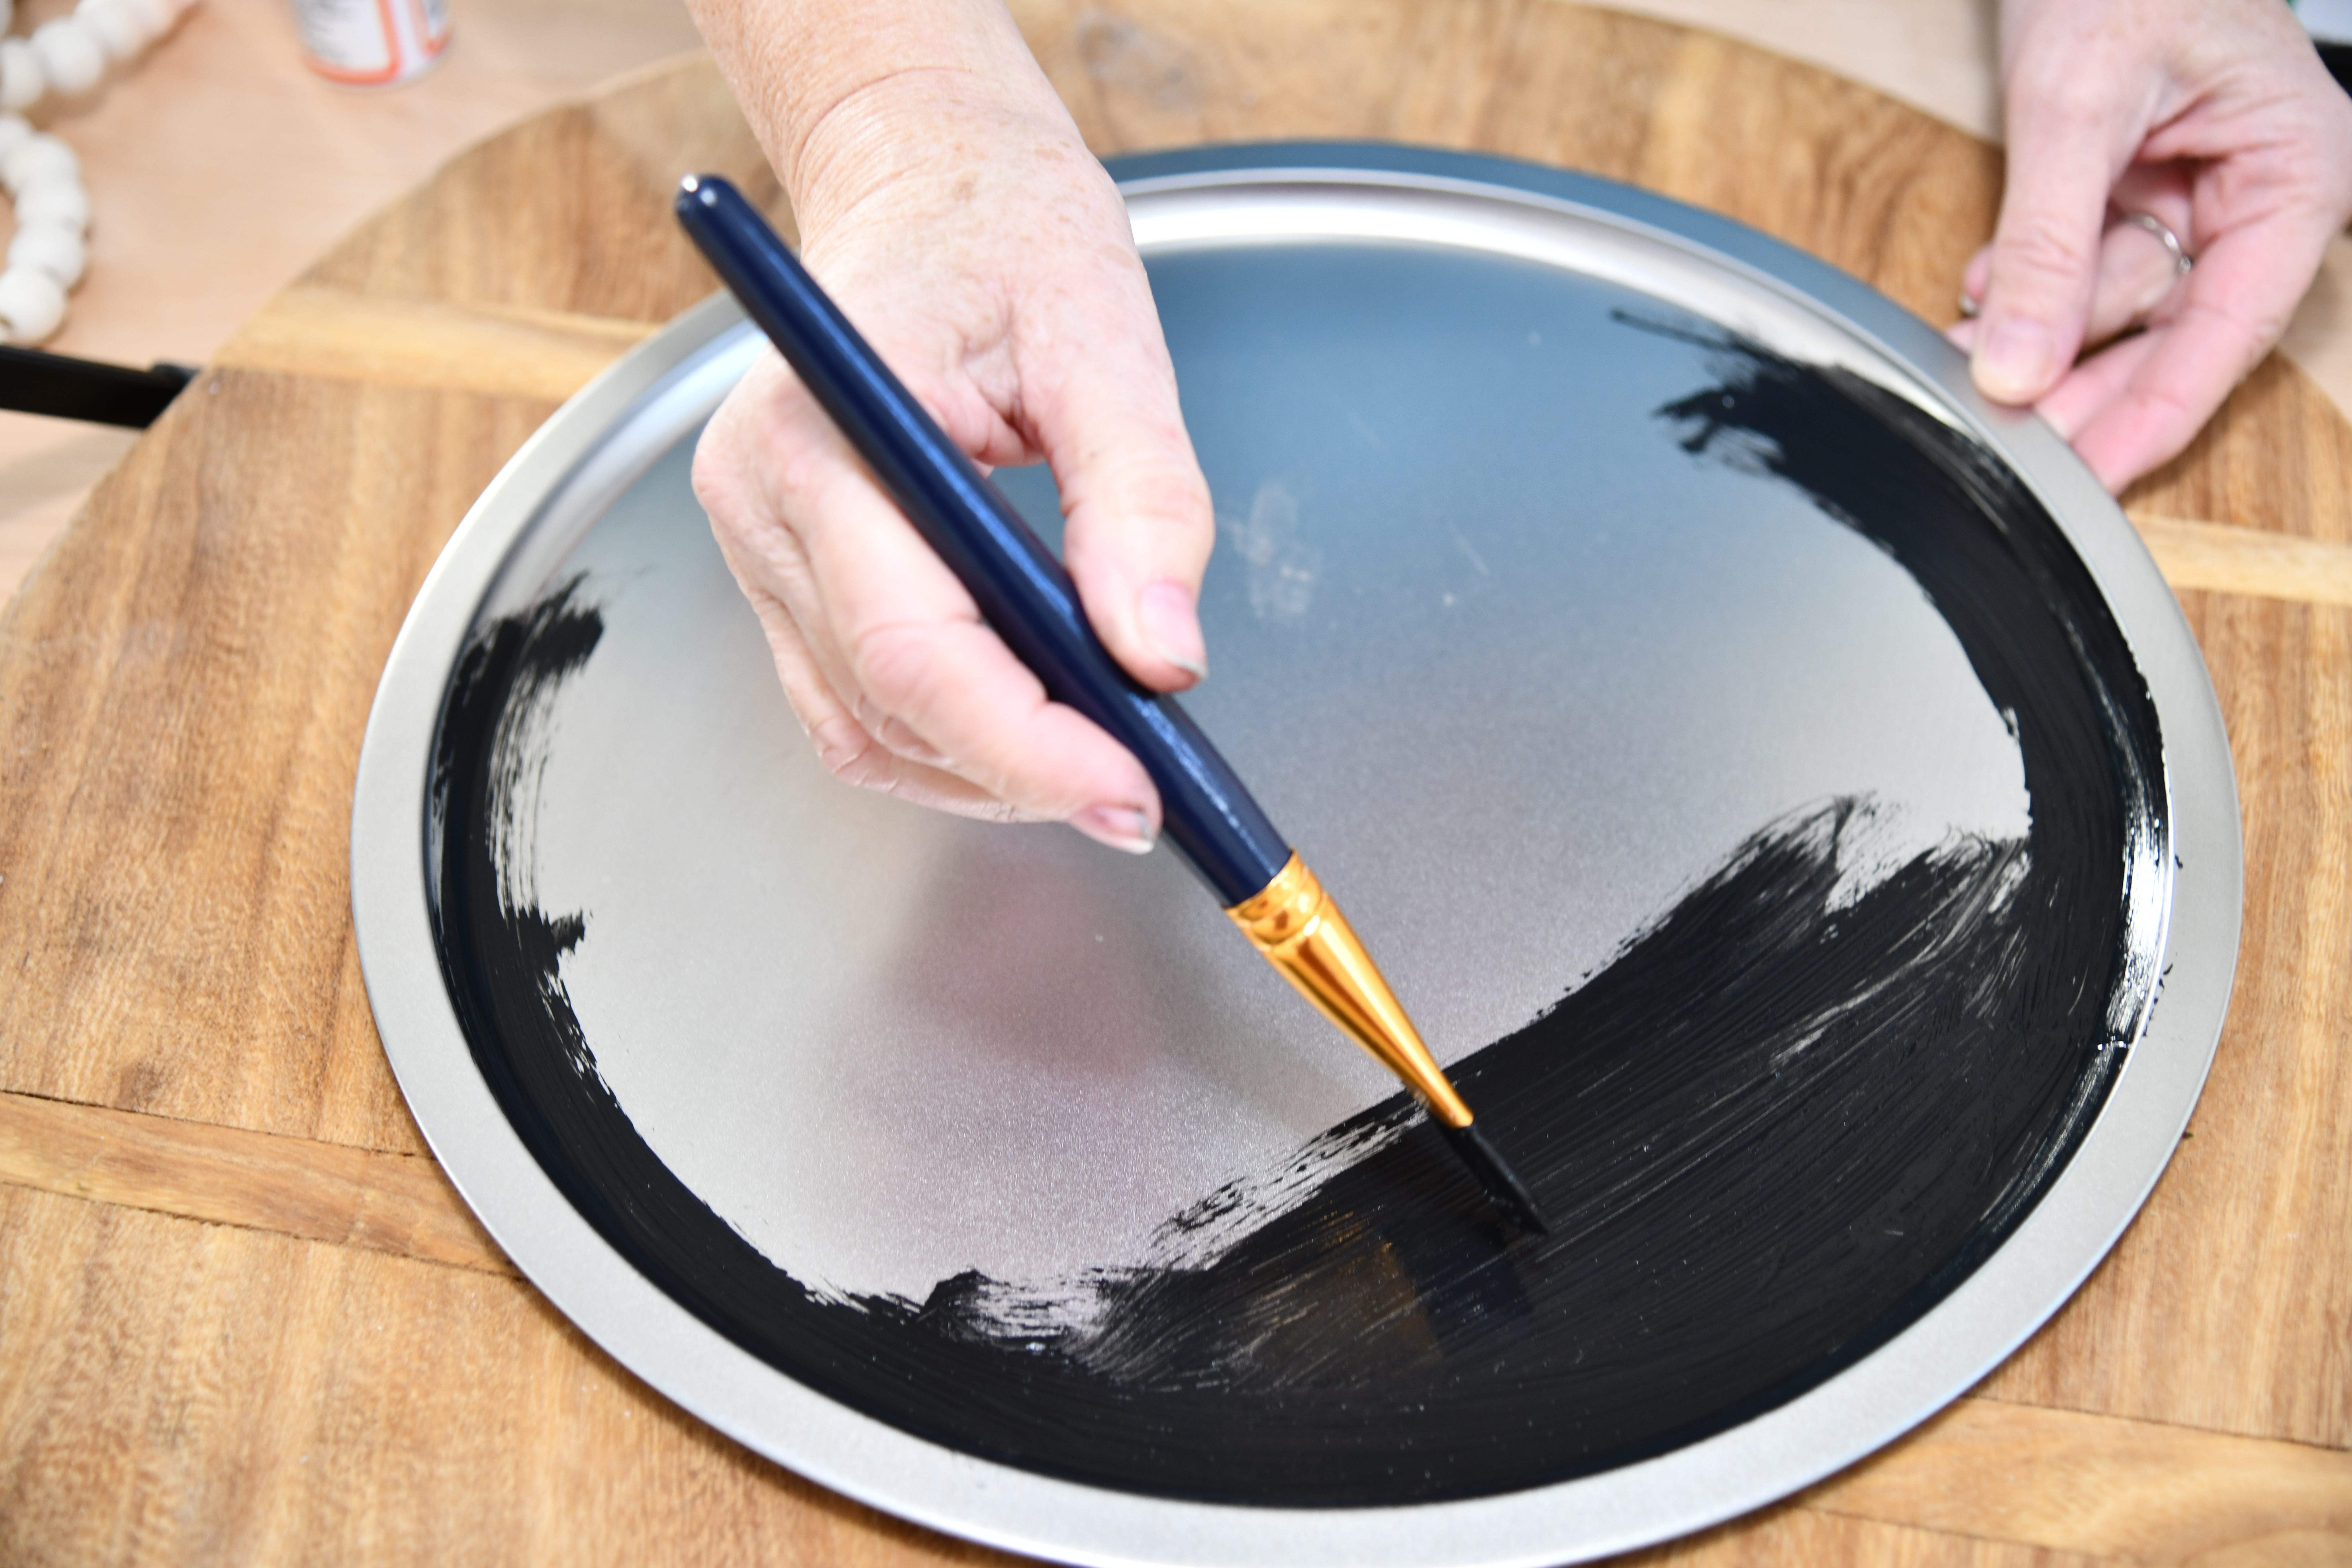 Chalkboard painting a pizza pan